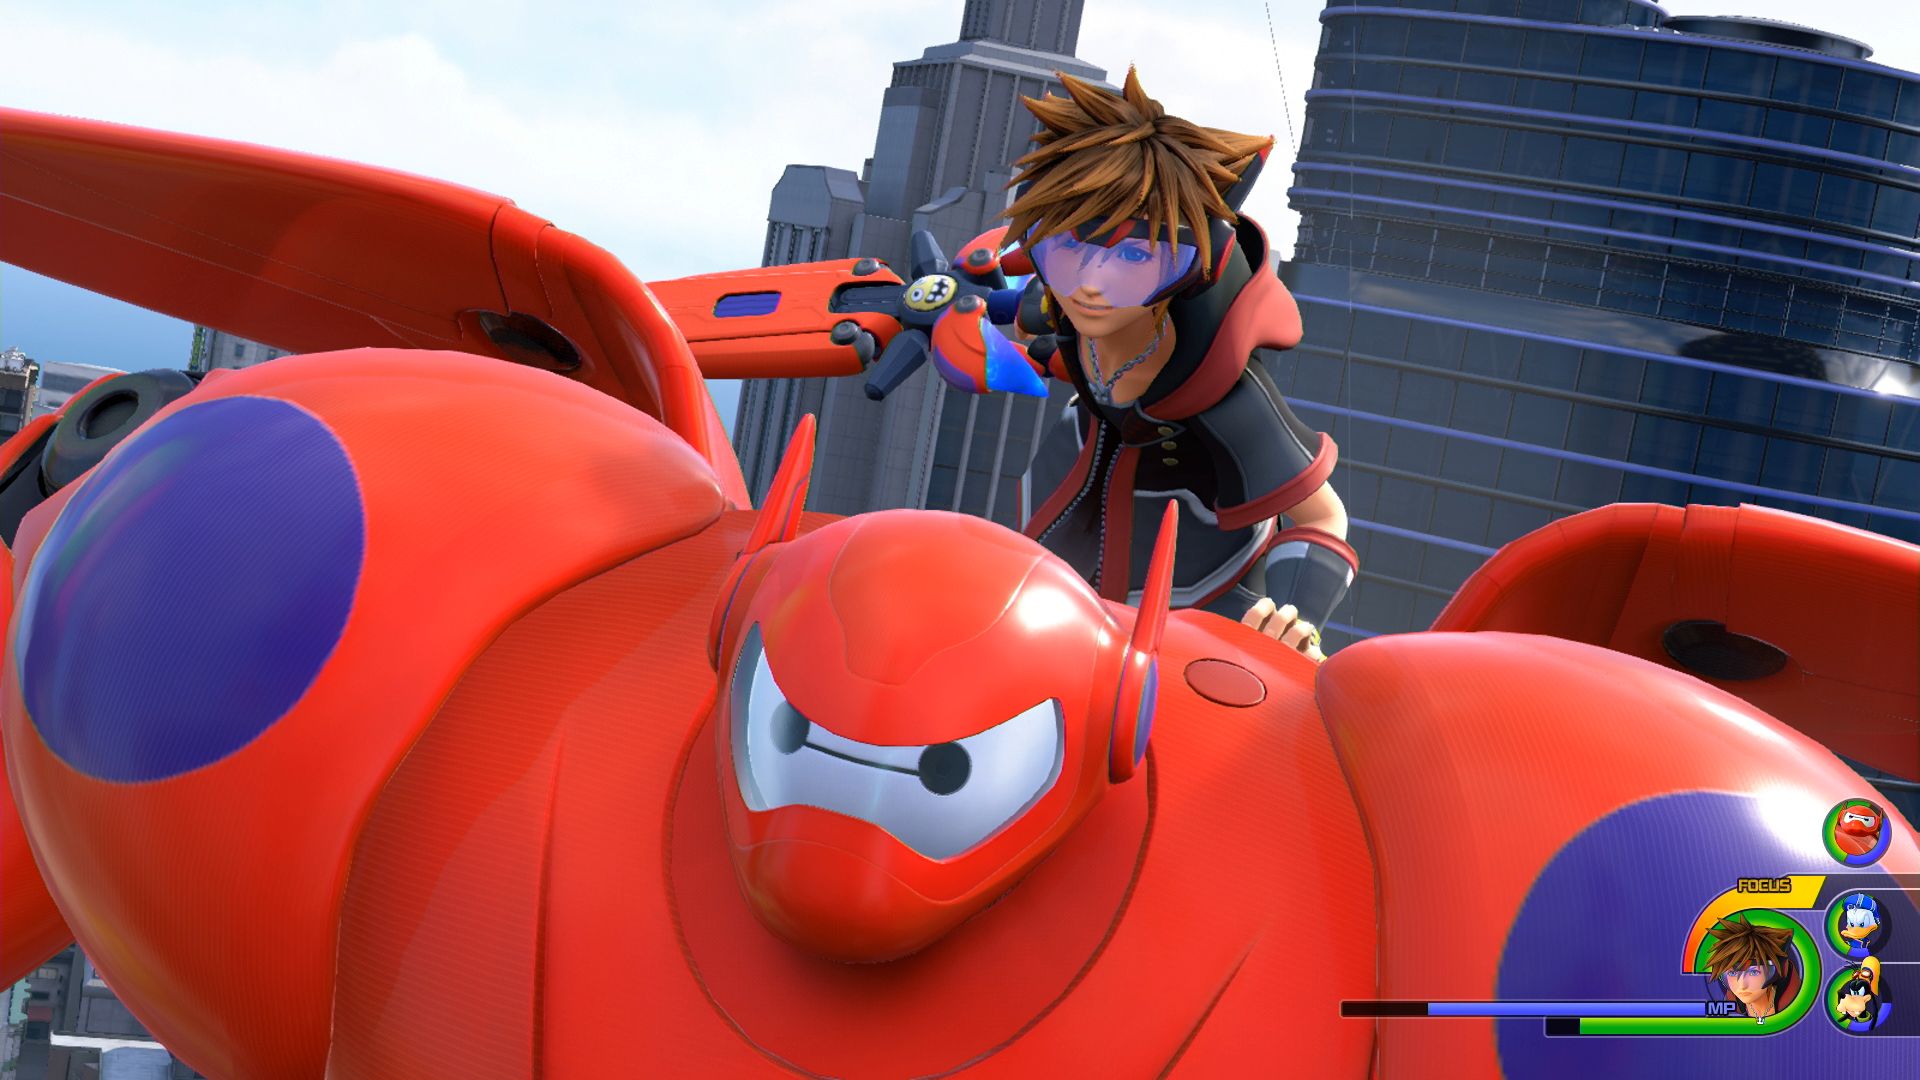 Kingdom Hearts III and Resident Evil 2 Top Japanese Sales for Second